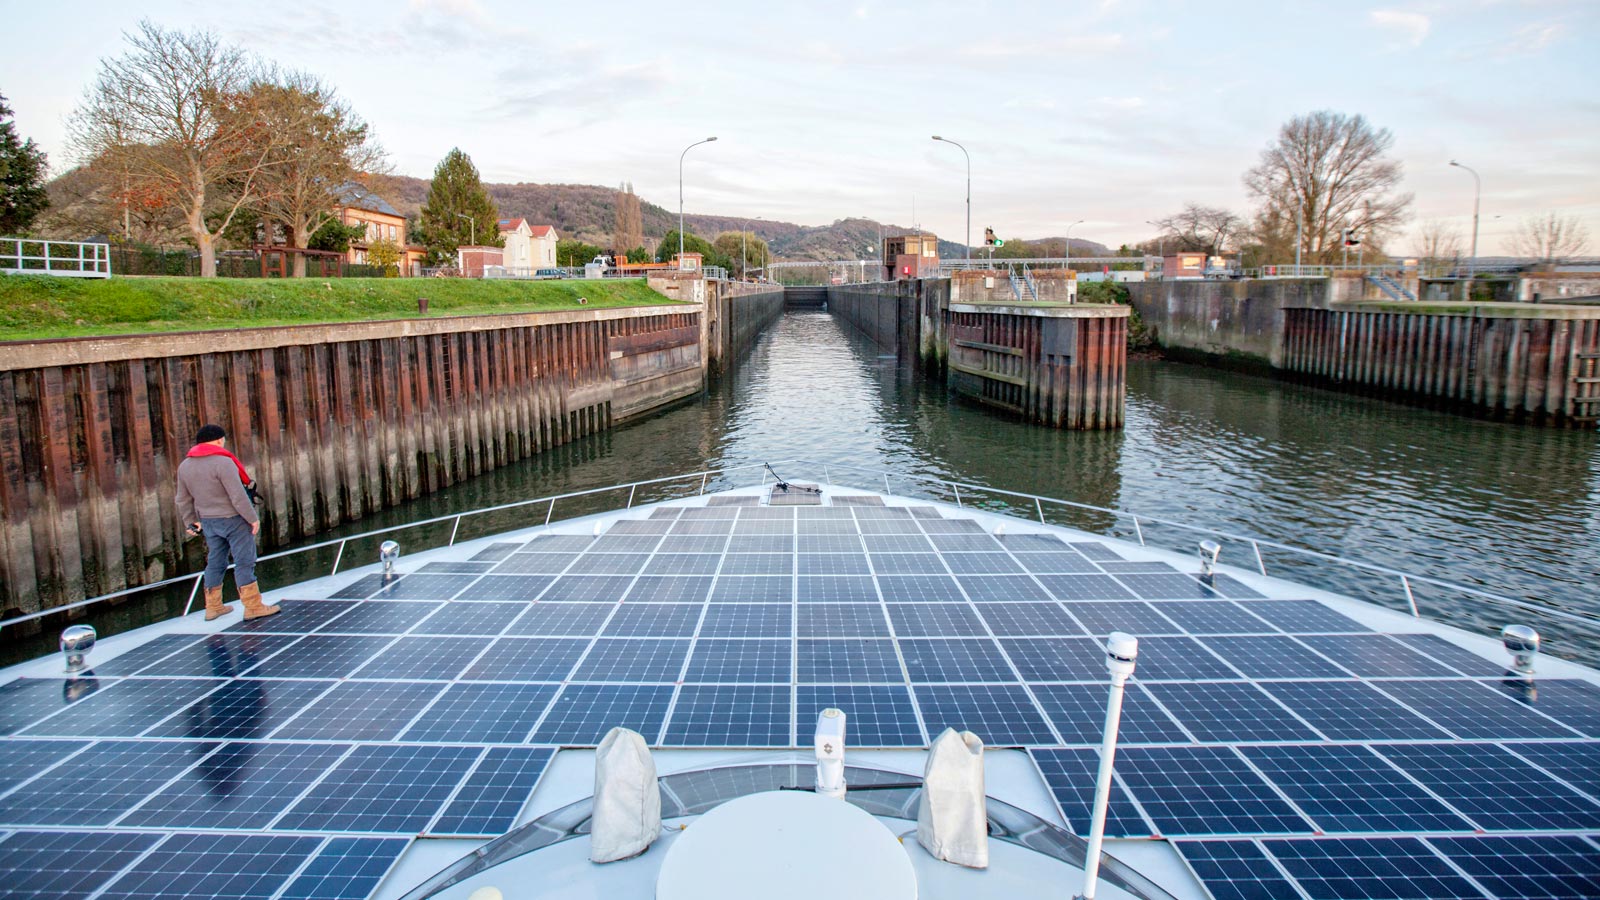 A boat covered with solar panels in a canal